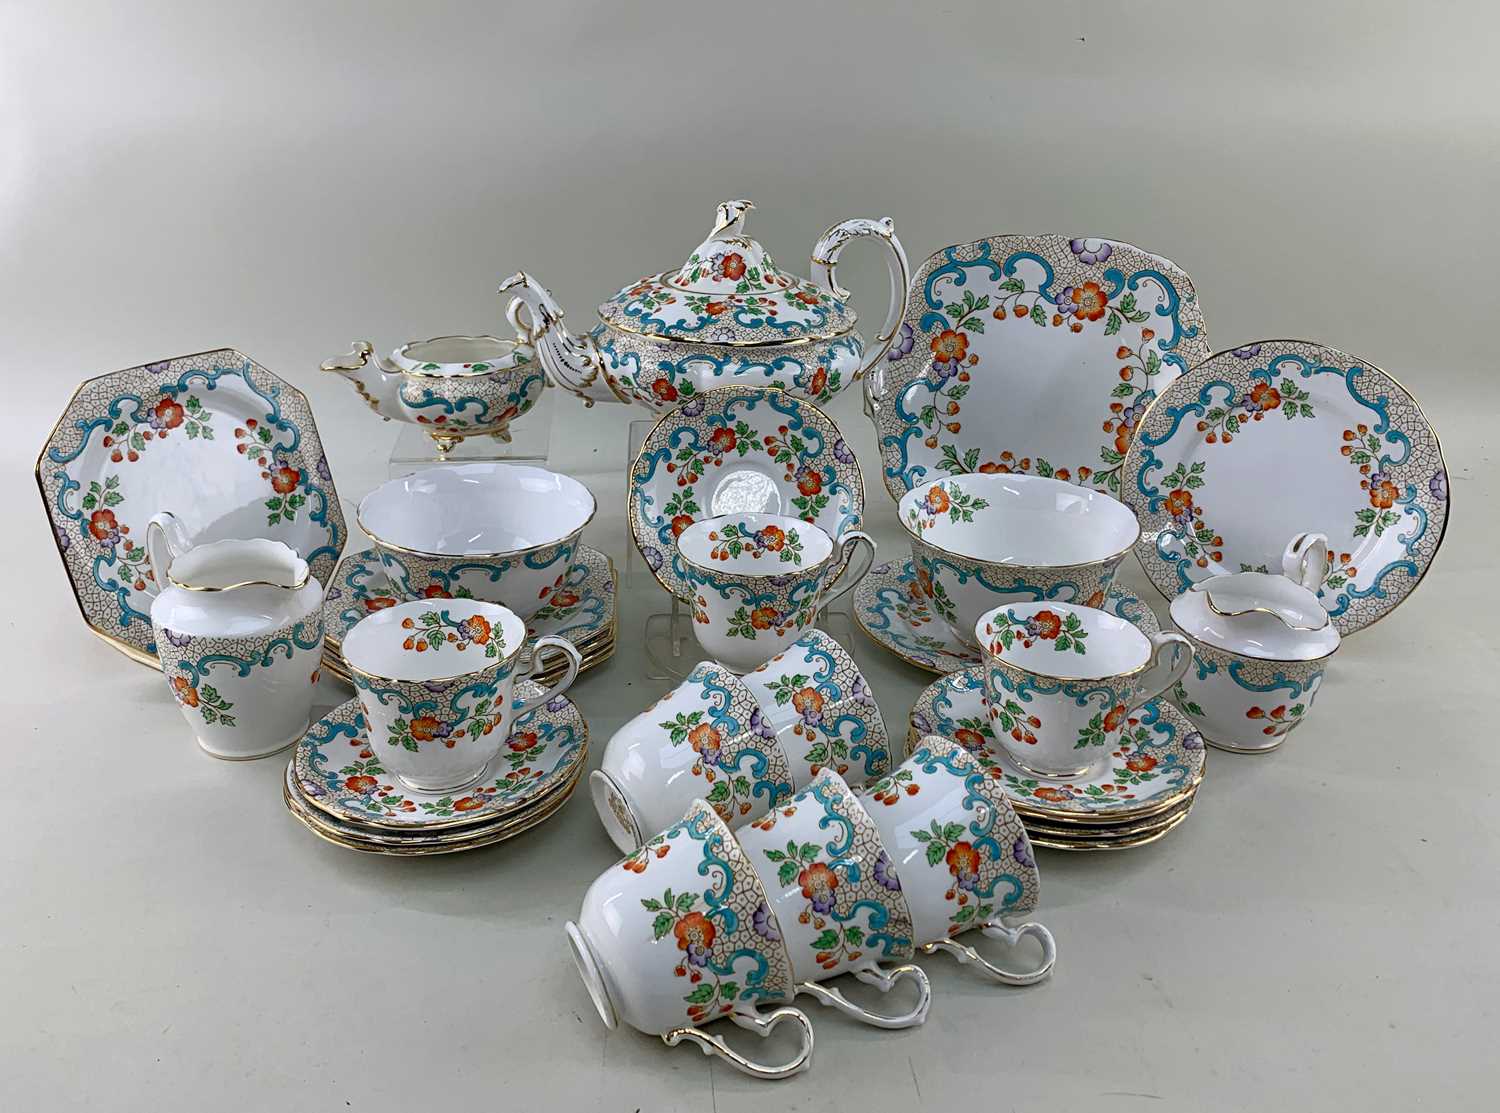 EARLY 20TH CENTURY ROYAL STAFFORD BONE CHINA TEA SERVICE, pattern no. 732562, decorated with red and